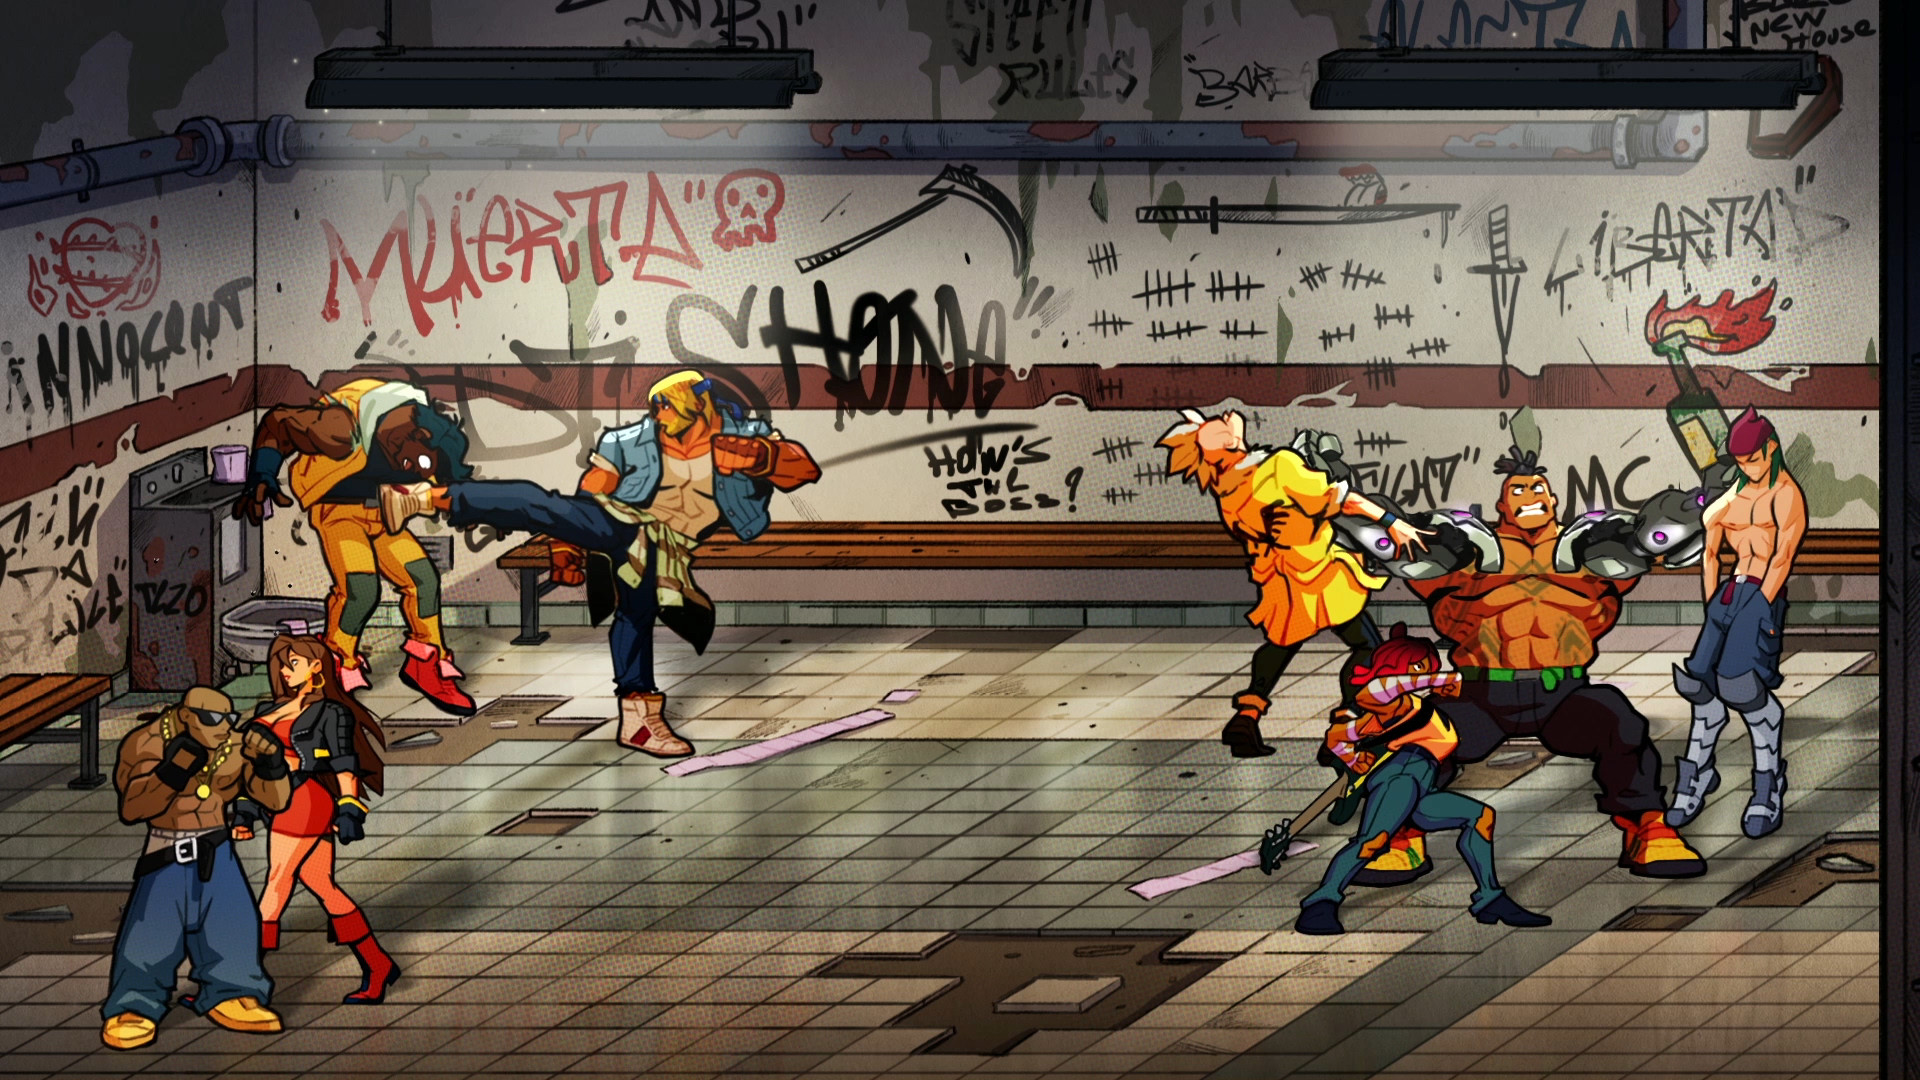 A scene from Streets of Rage 4 all three heroes are fighting multiple opponents in what appears to be the public toilet of a subway stop.